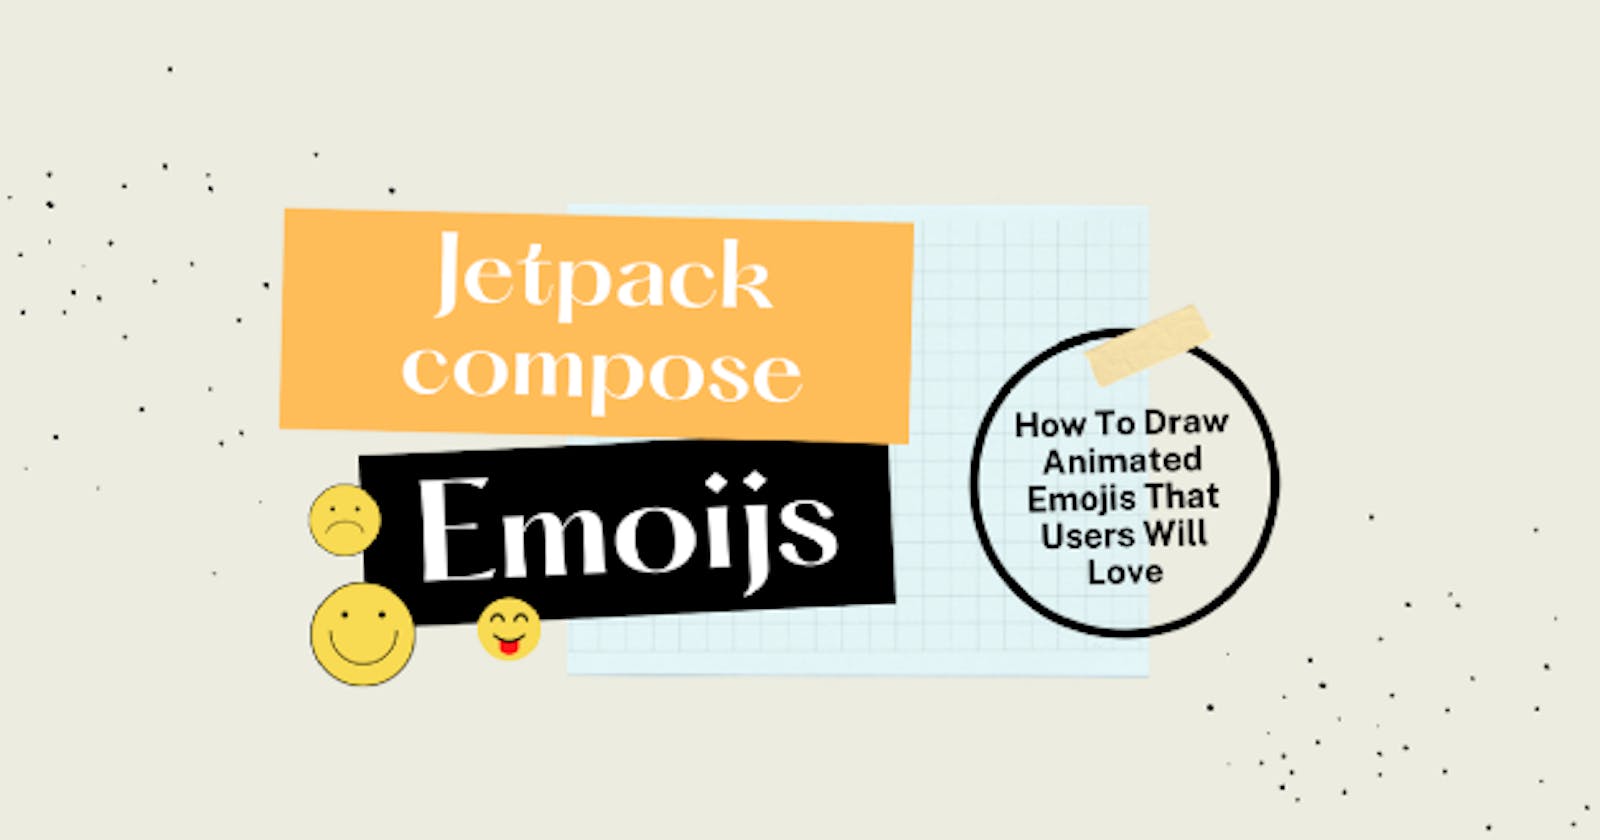 Compose — How To Draw Animated Emojis That Users Will Love